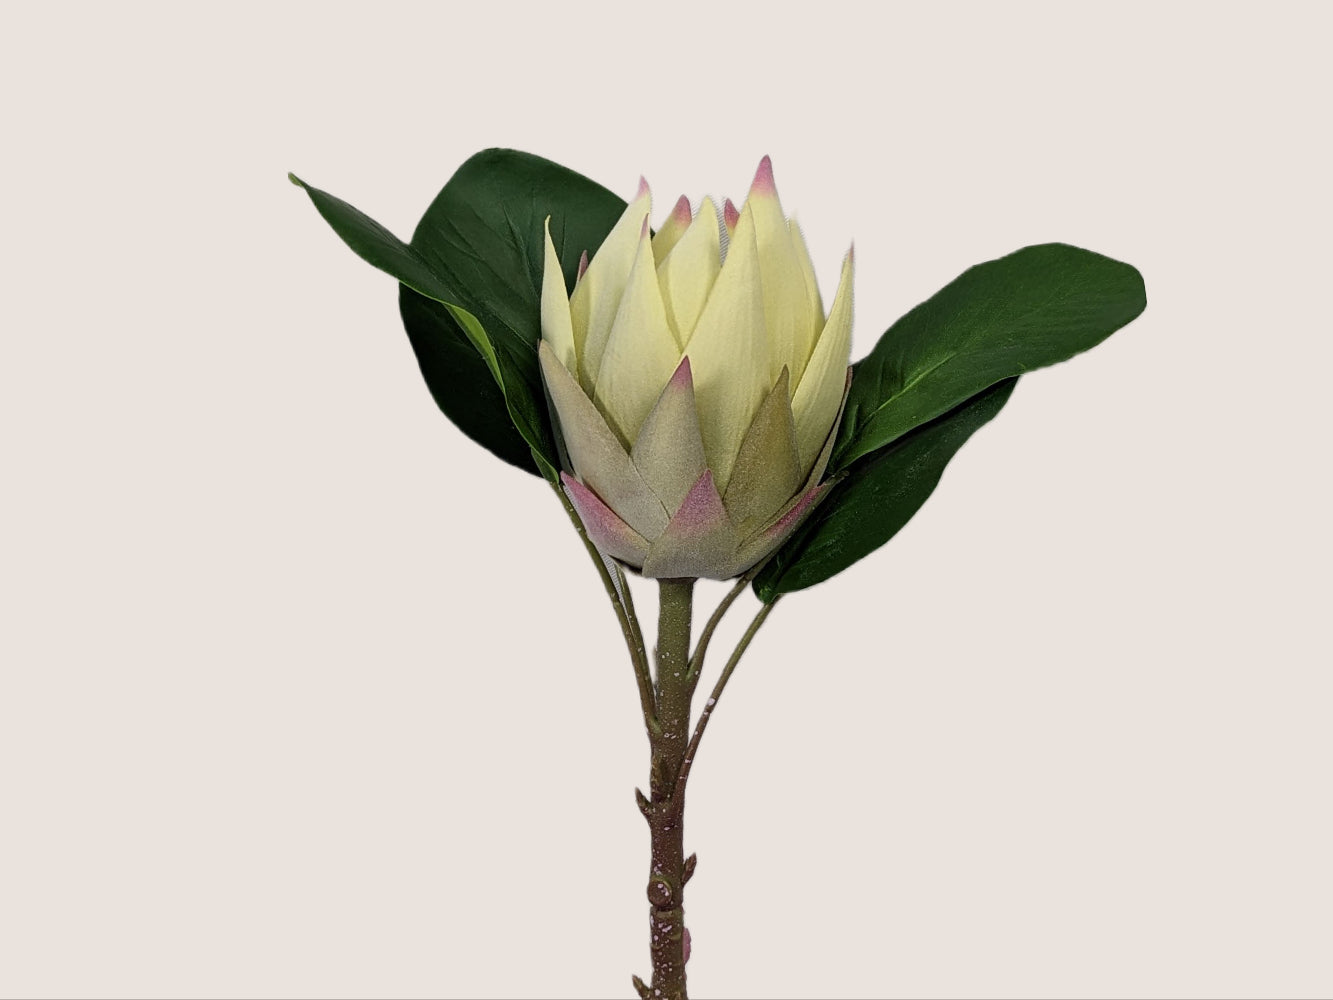 Artificial king protea flower with cream and pink petals, brown and green stem, and dark green leaves. The stem is 28 inches tall and the single flower head has a slightly fuzzy texture. Against a neutral beige background.